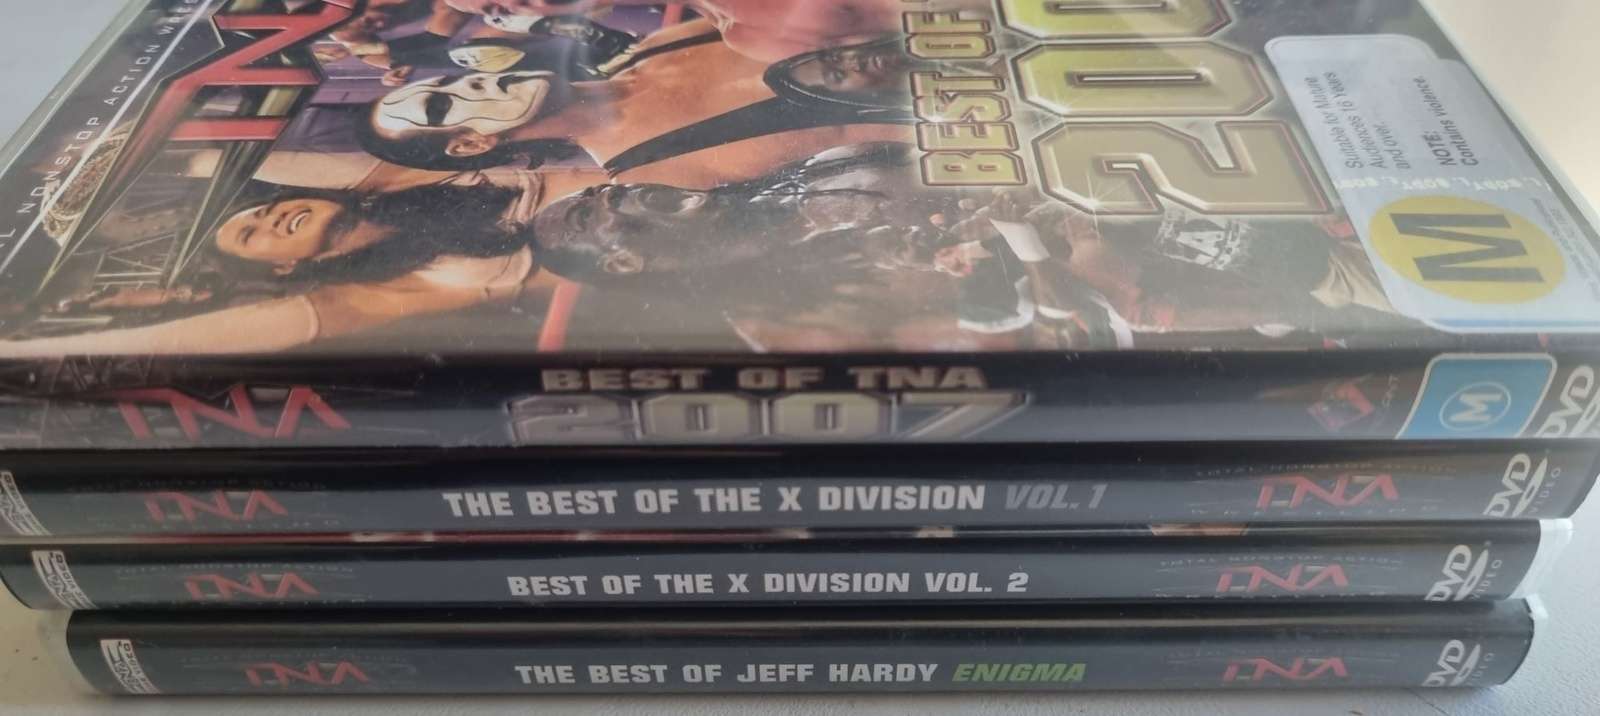 TNA Wrestling Collection 5 Discs